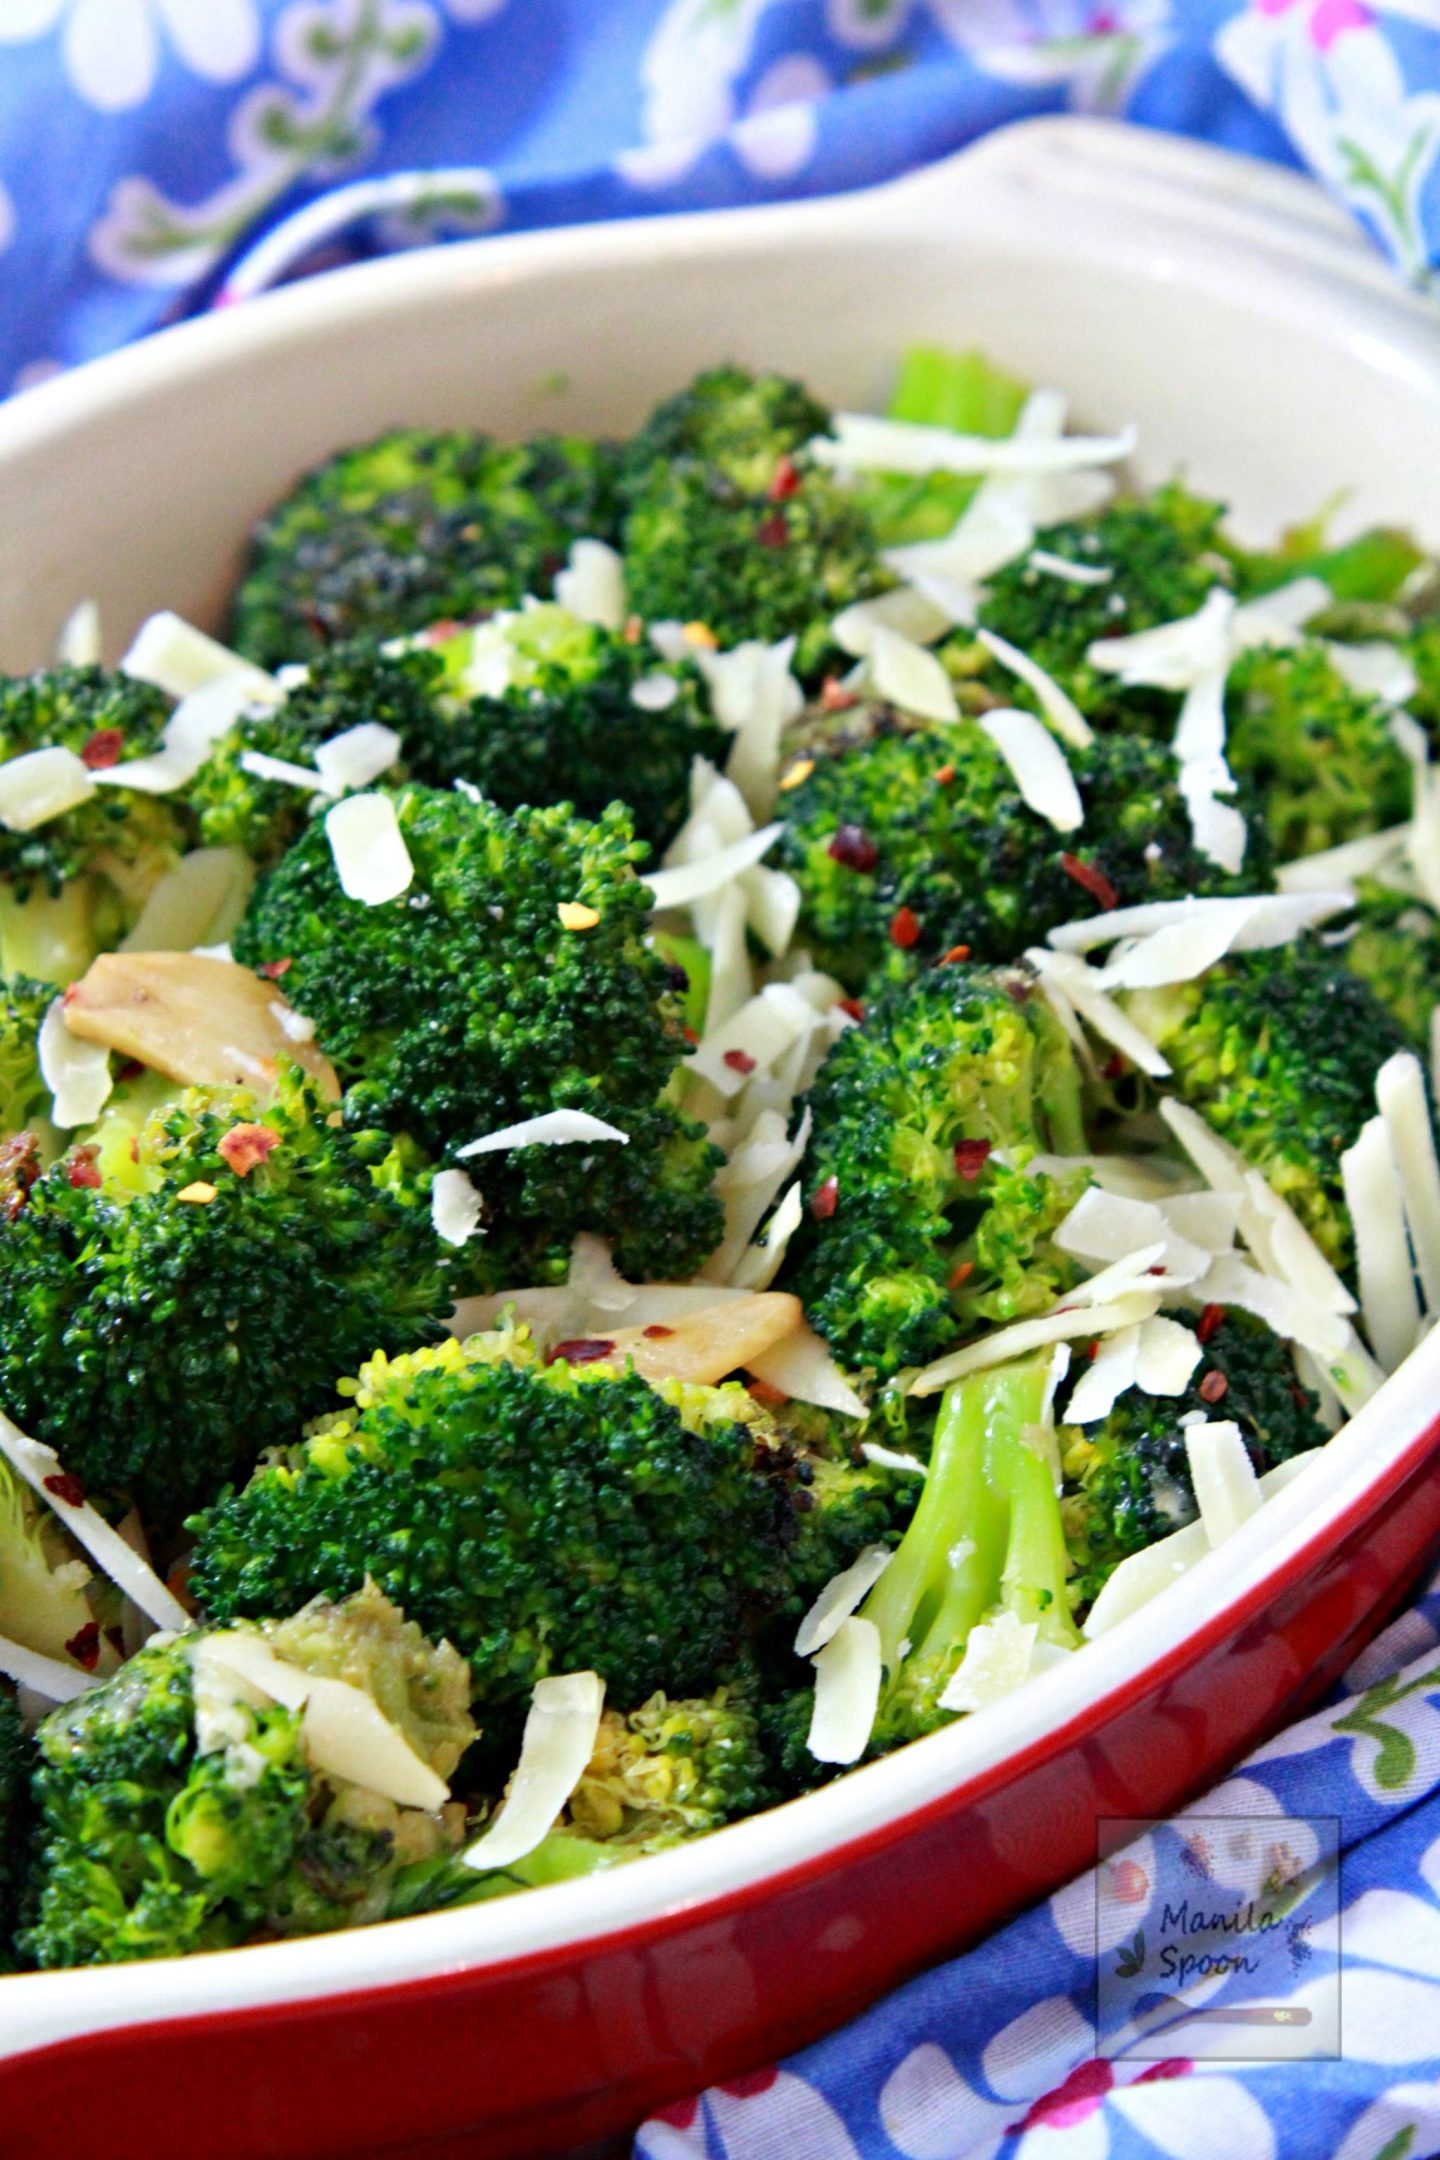 Just 10 minutes to make this super-easy and truly tasty side dish - Garlic Parmesan Broccoli! It's so addictively yummy you'll be making this over and over again!